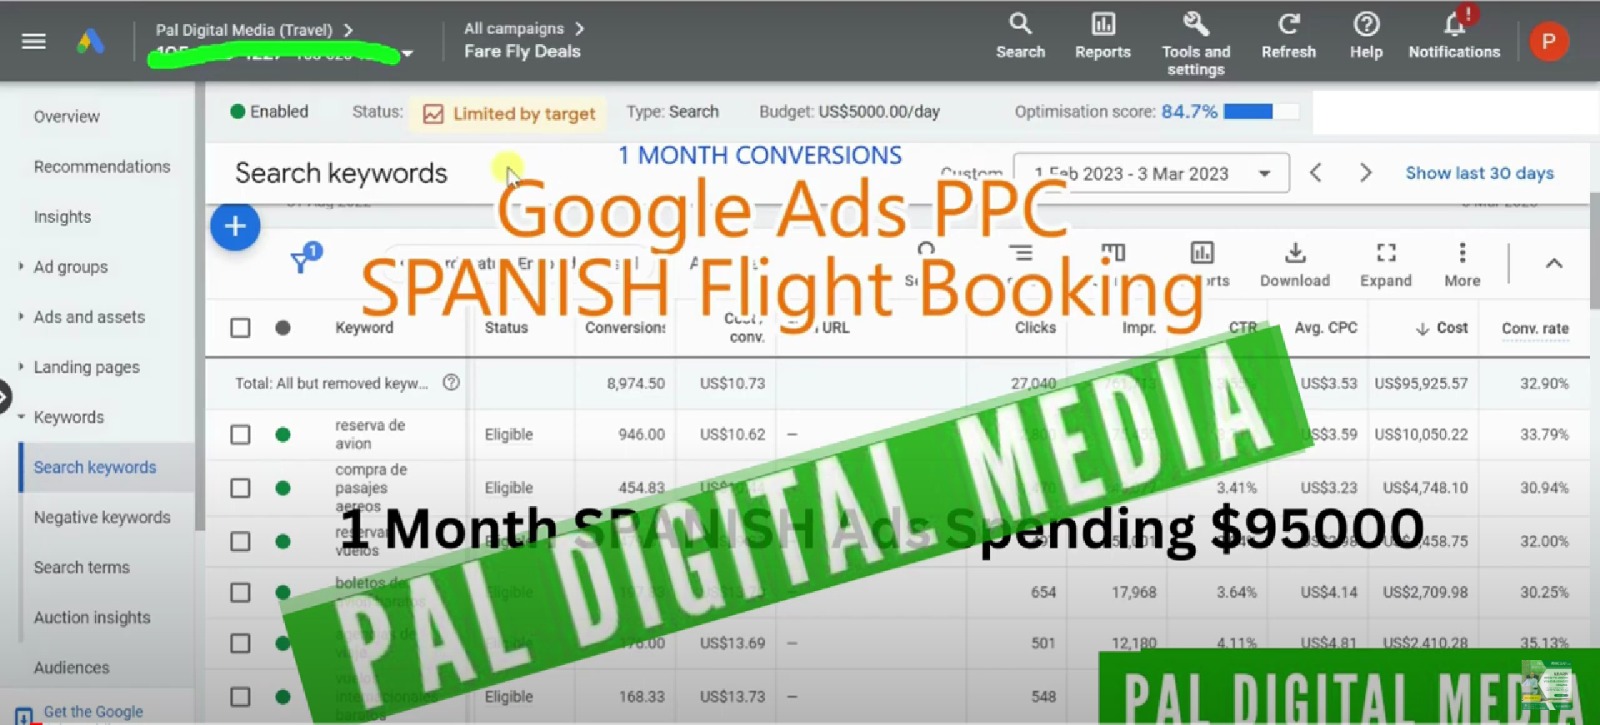 Spanish airlines google ads campaigns